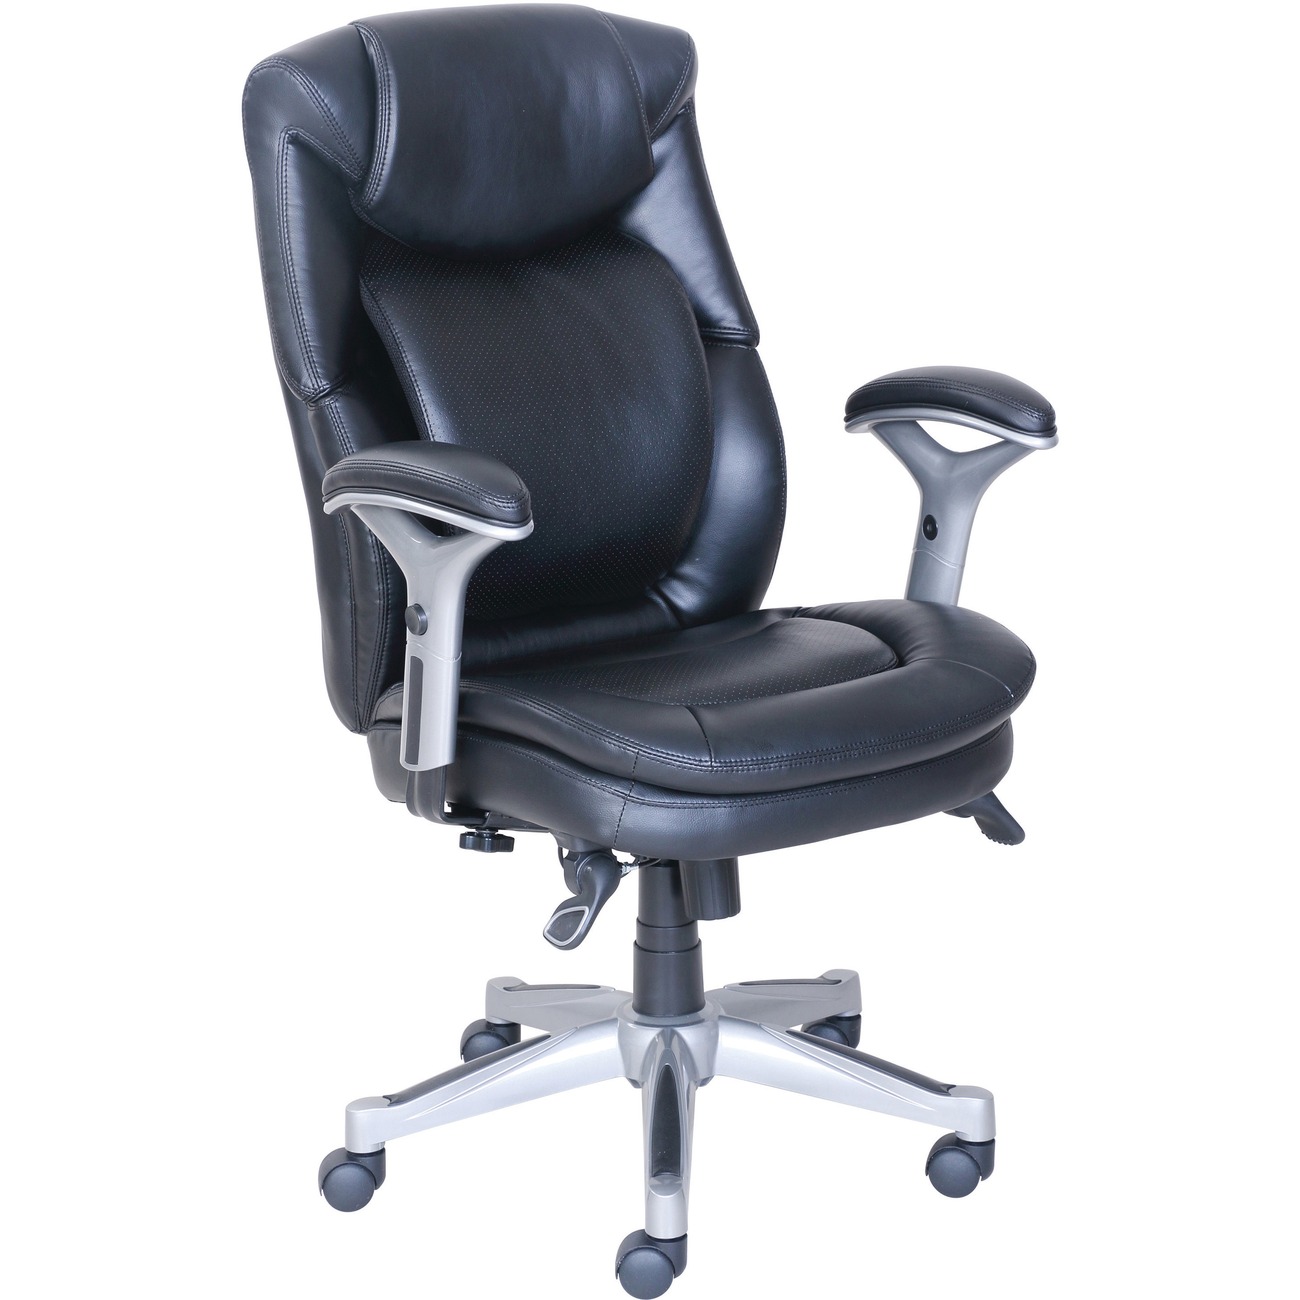 Lorell "Wellness By Design" Executive Chair (LLR47920)-image